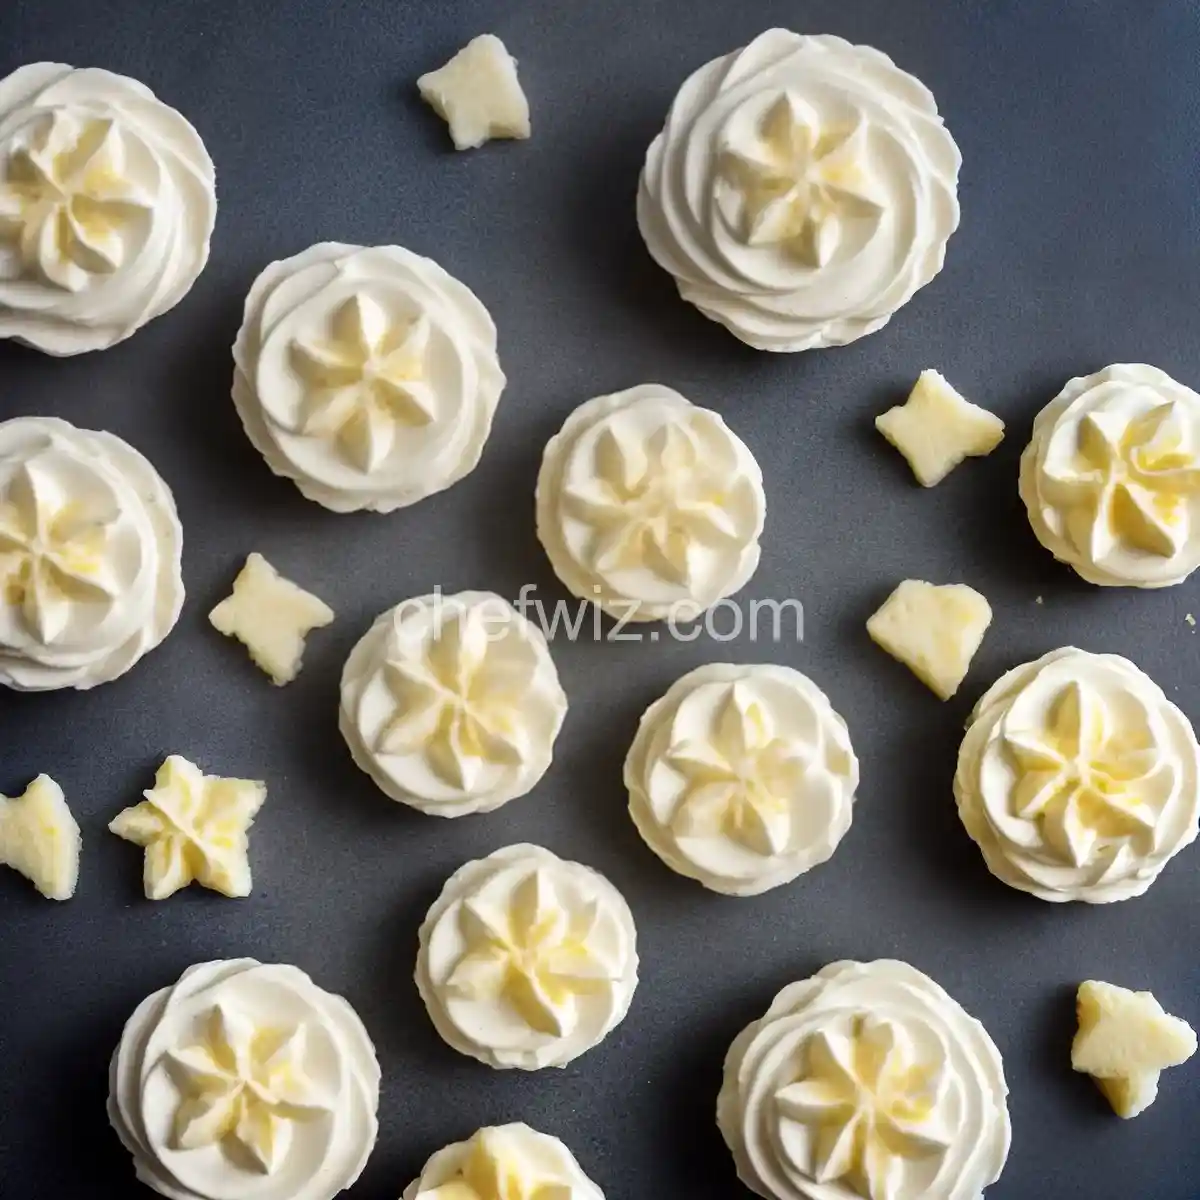 Butter Cream Mints - Recipes. Food. Cooking. Eating. Dinner ideas ...